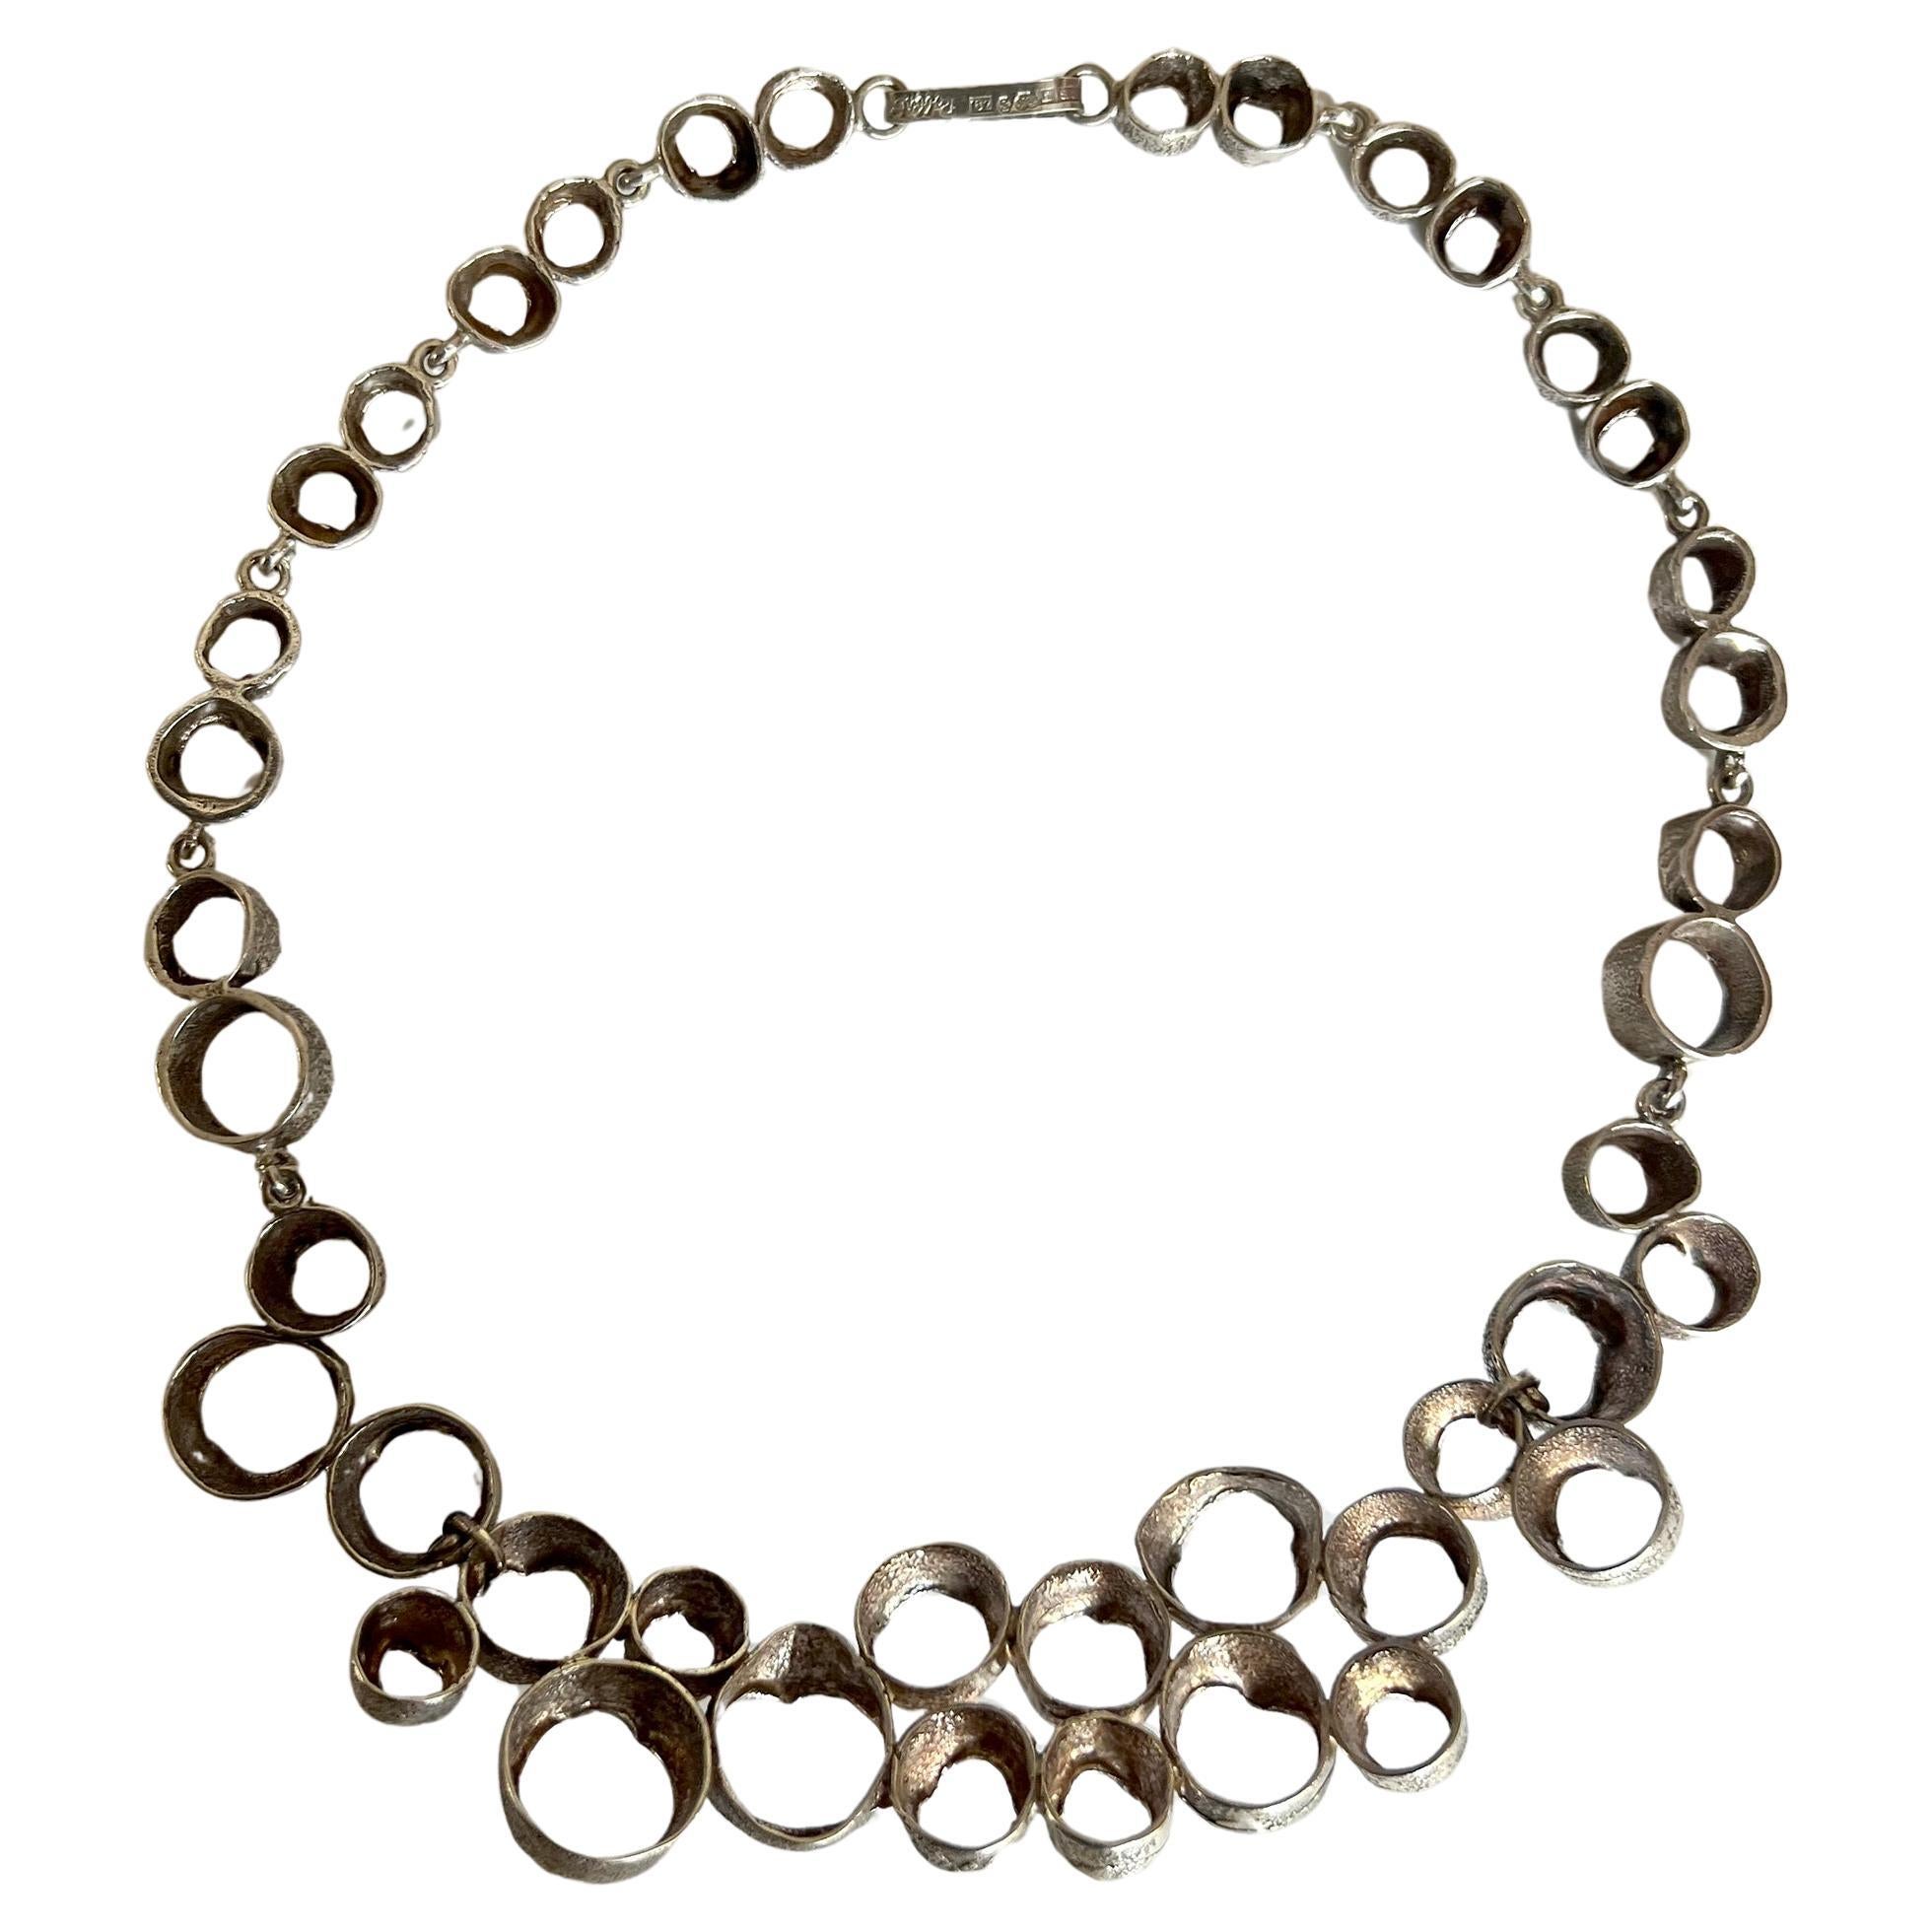 Swedish modernist sterling silver linked necklace created by Eric Scott Robbert, 1970's.  Necklace has a 16